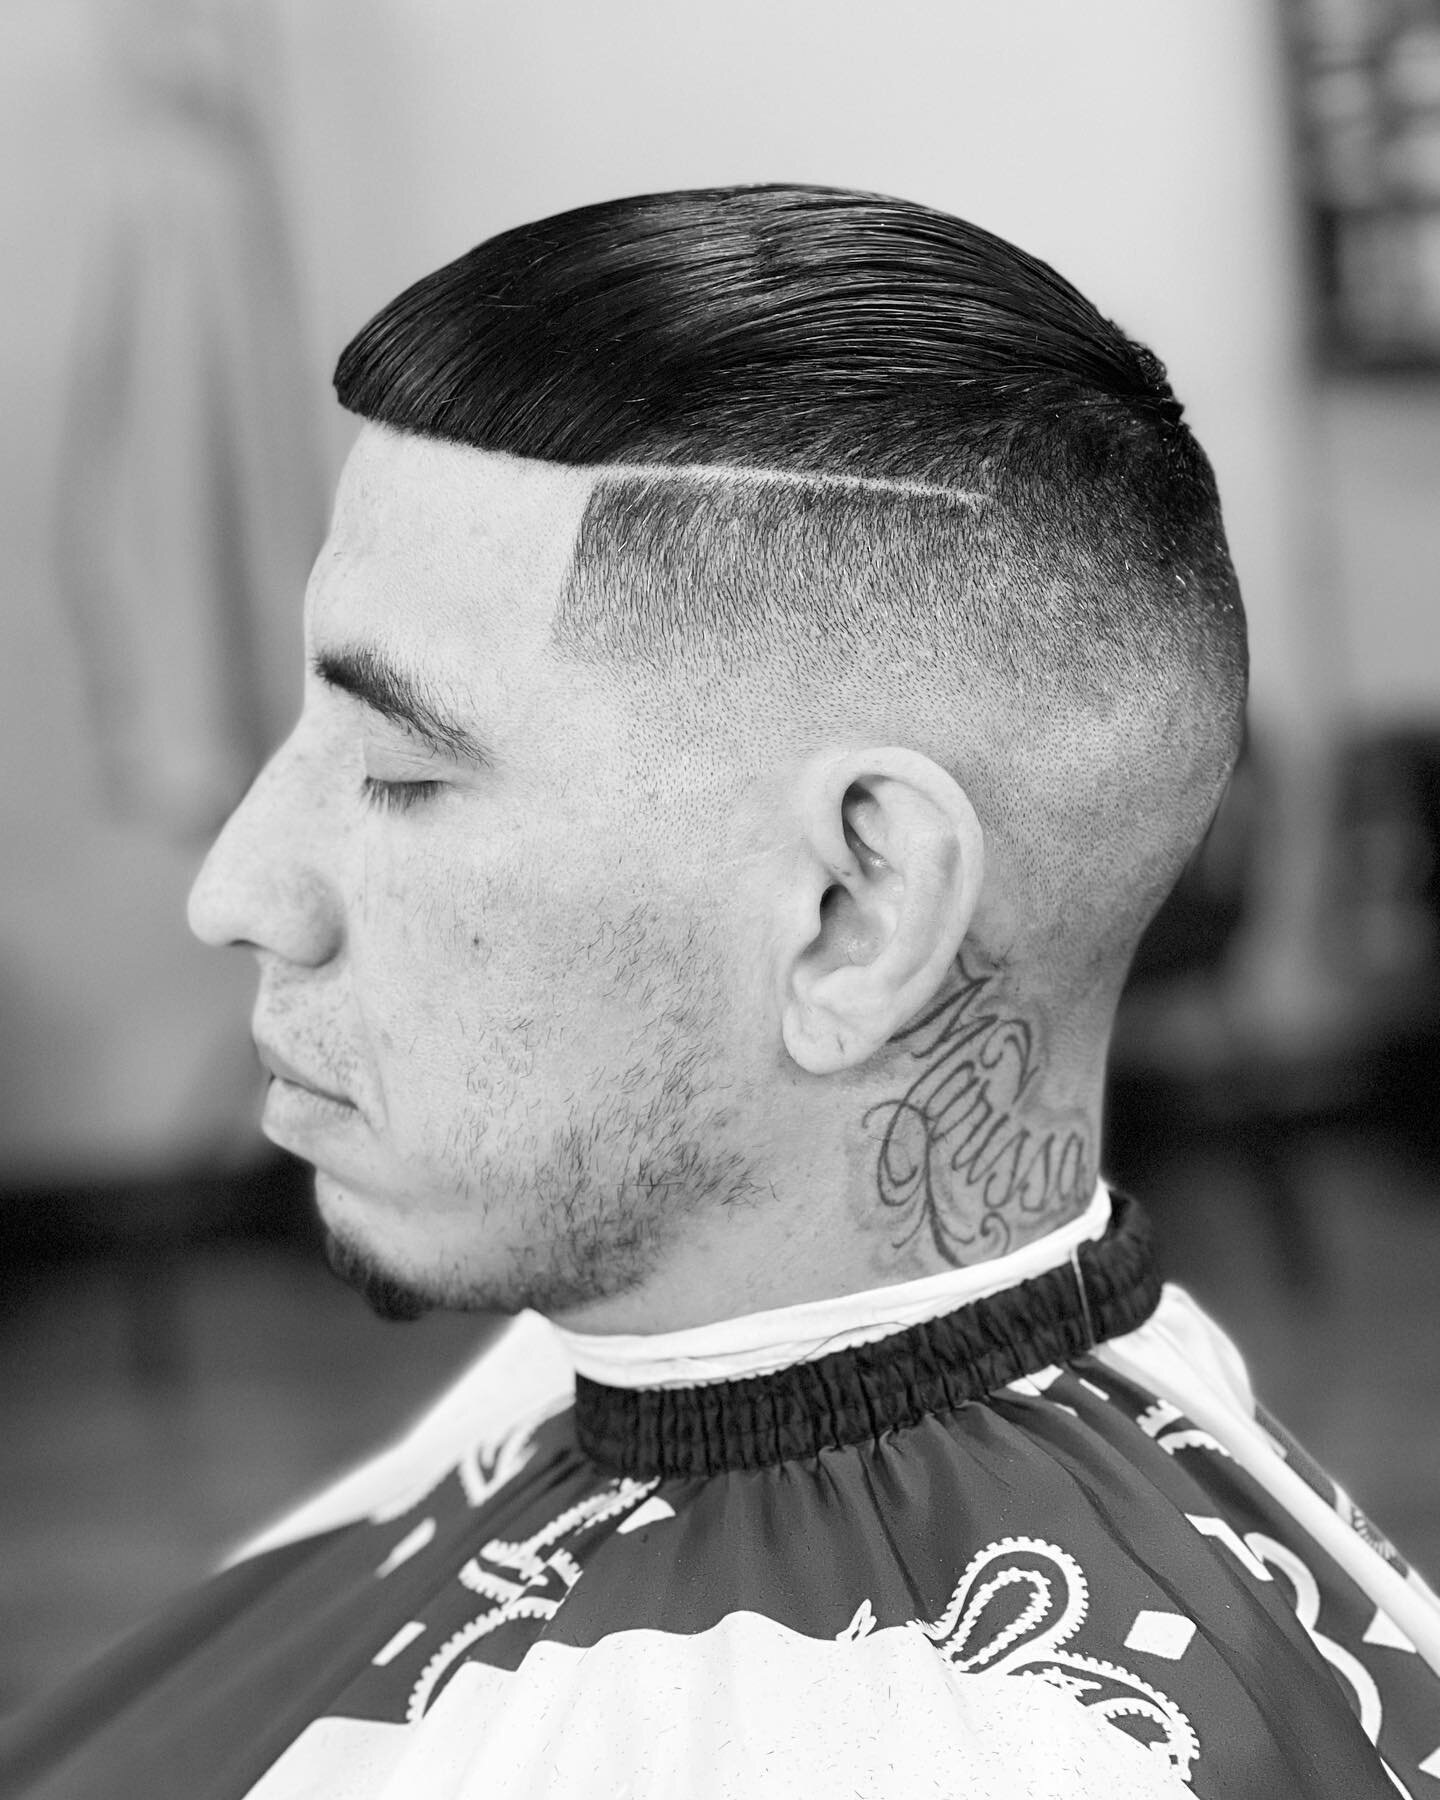 REDTHEBARBER.com
Blends and things. 🔪